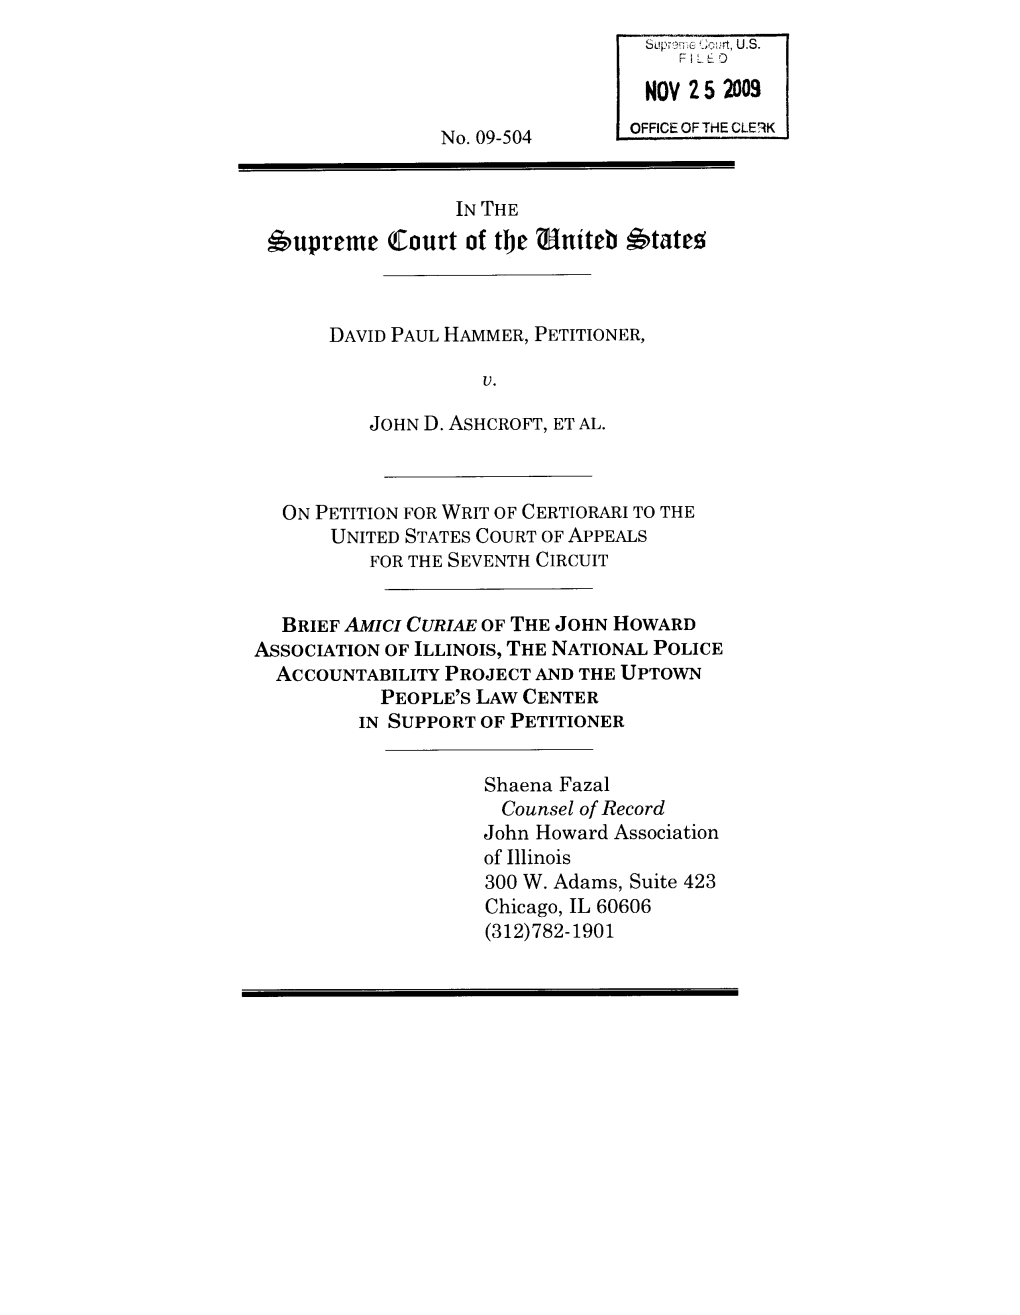 Amicus Brief of the National Police Accountability